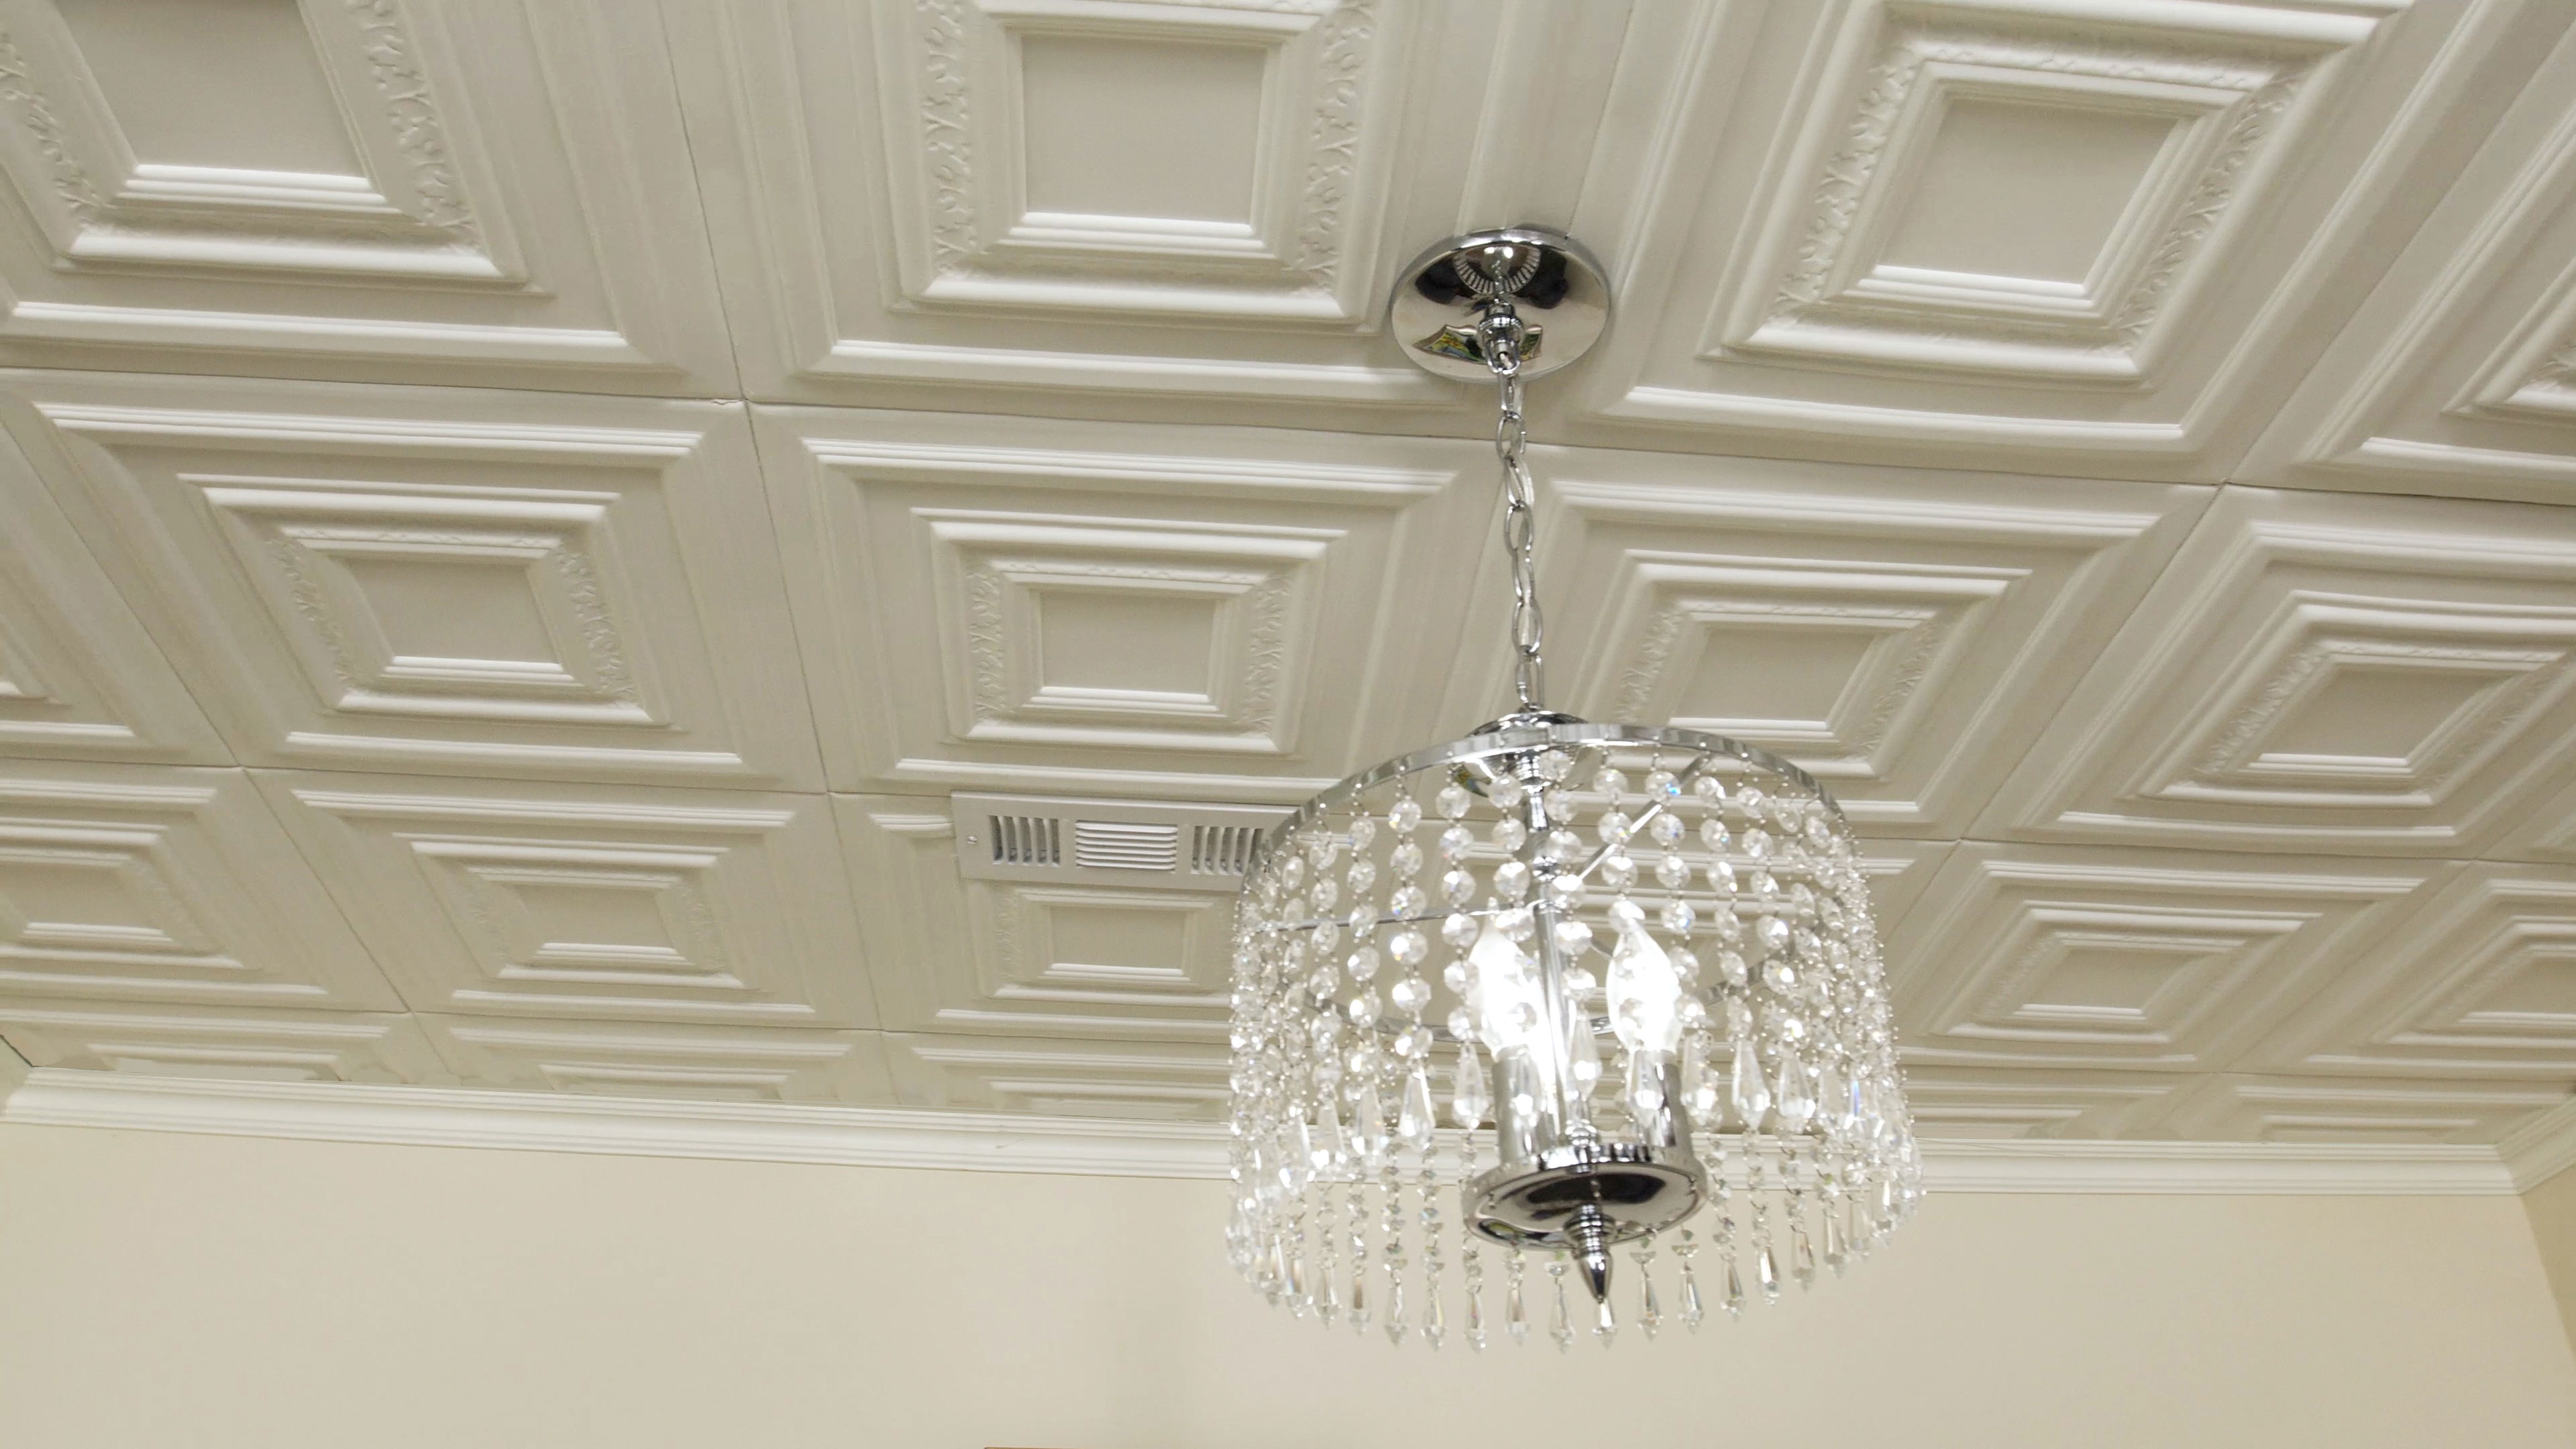 Silver and crystal chandelier hanging from foam tile ceiling